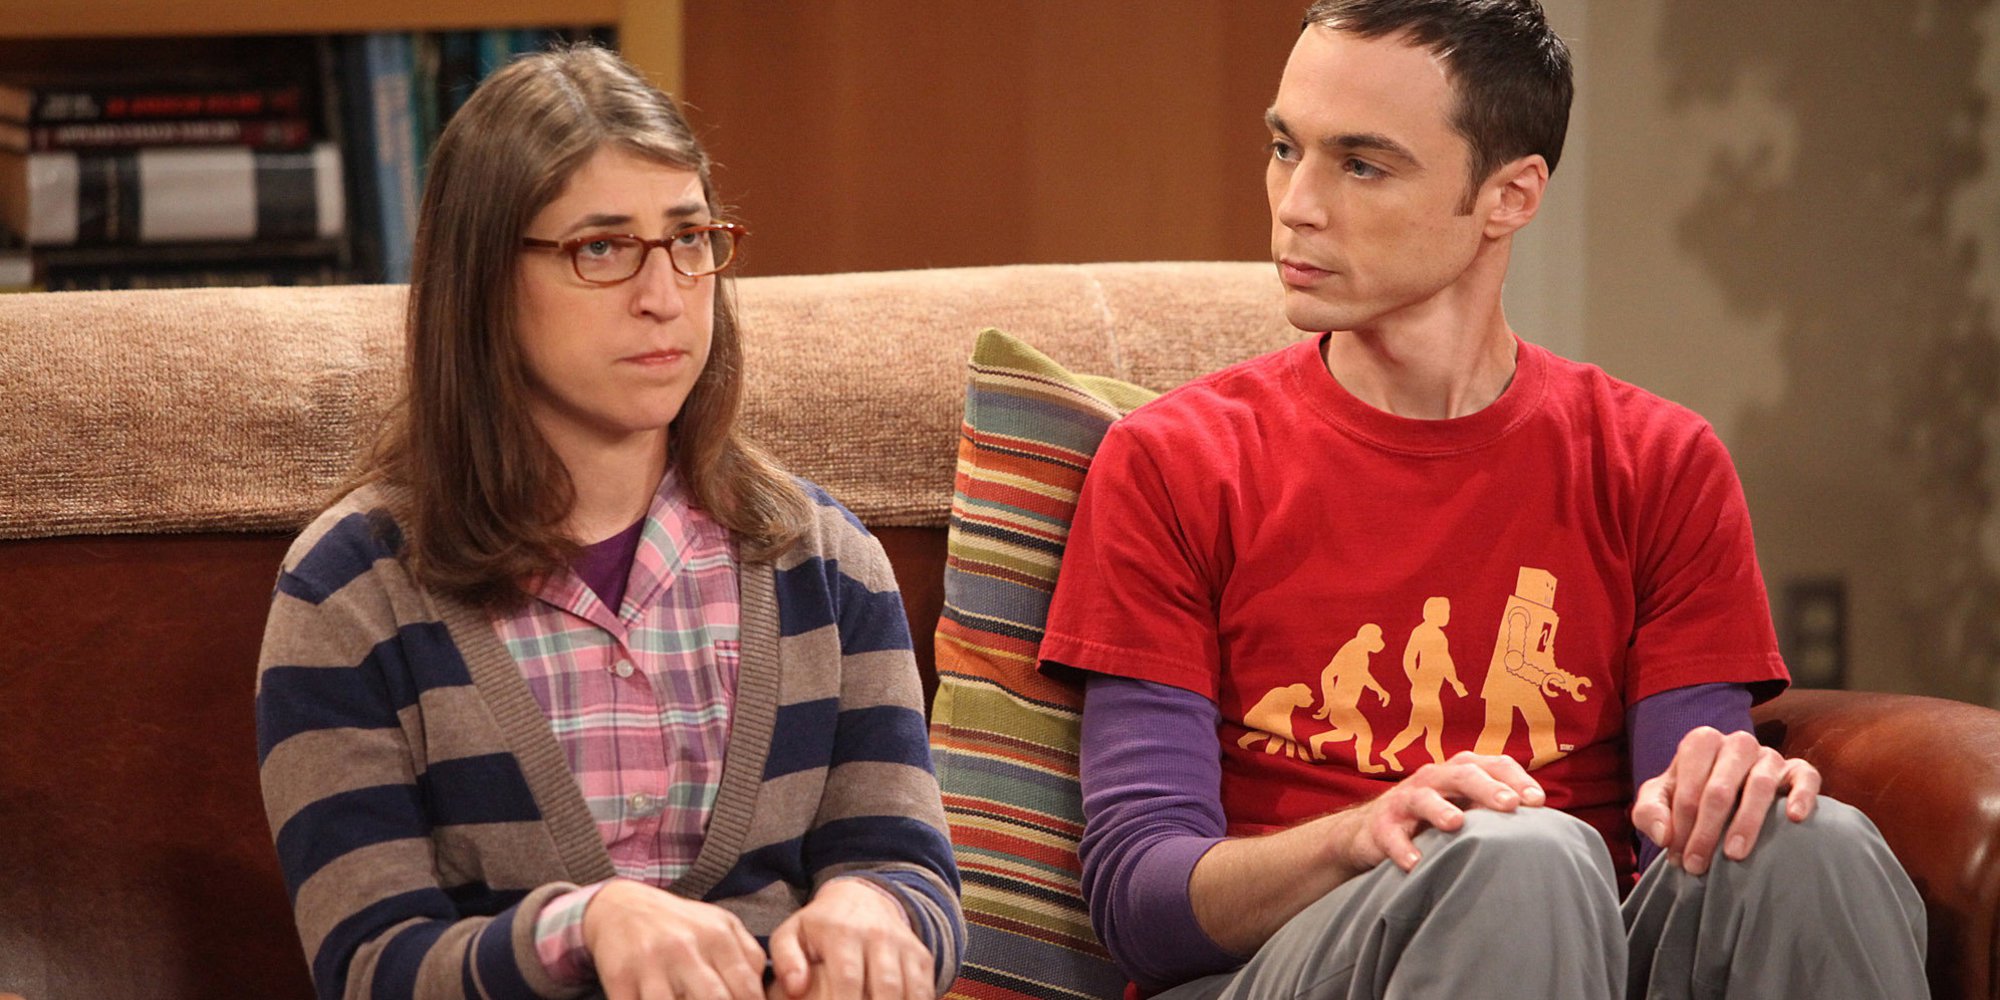 LOS ANGELES - AUGUST 23: "The Zazzy Substitution" -- The guys are concerned as Sheldon (Jim Parsons, right) searches for an alternative to human companionship with Amy Farrah Fowler (Mayim Bialik, left), on THE BIG BANG THEORY, Thursday, Oct. 7 (8:00-8:31 PM, ET/PT) on the CBS Television Network.(Photo by Richard Cartwright/CBS via Getty Images)